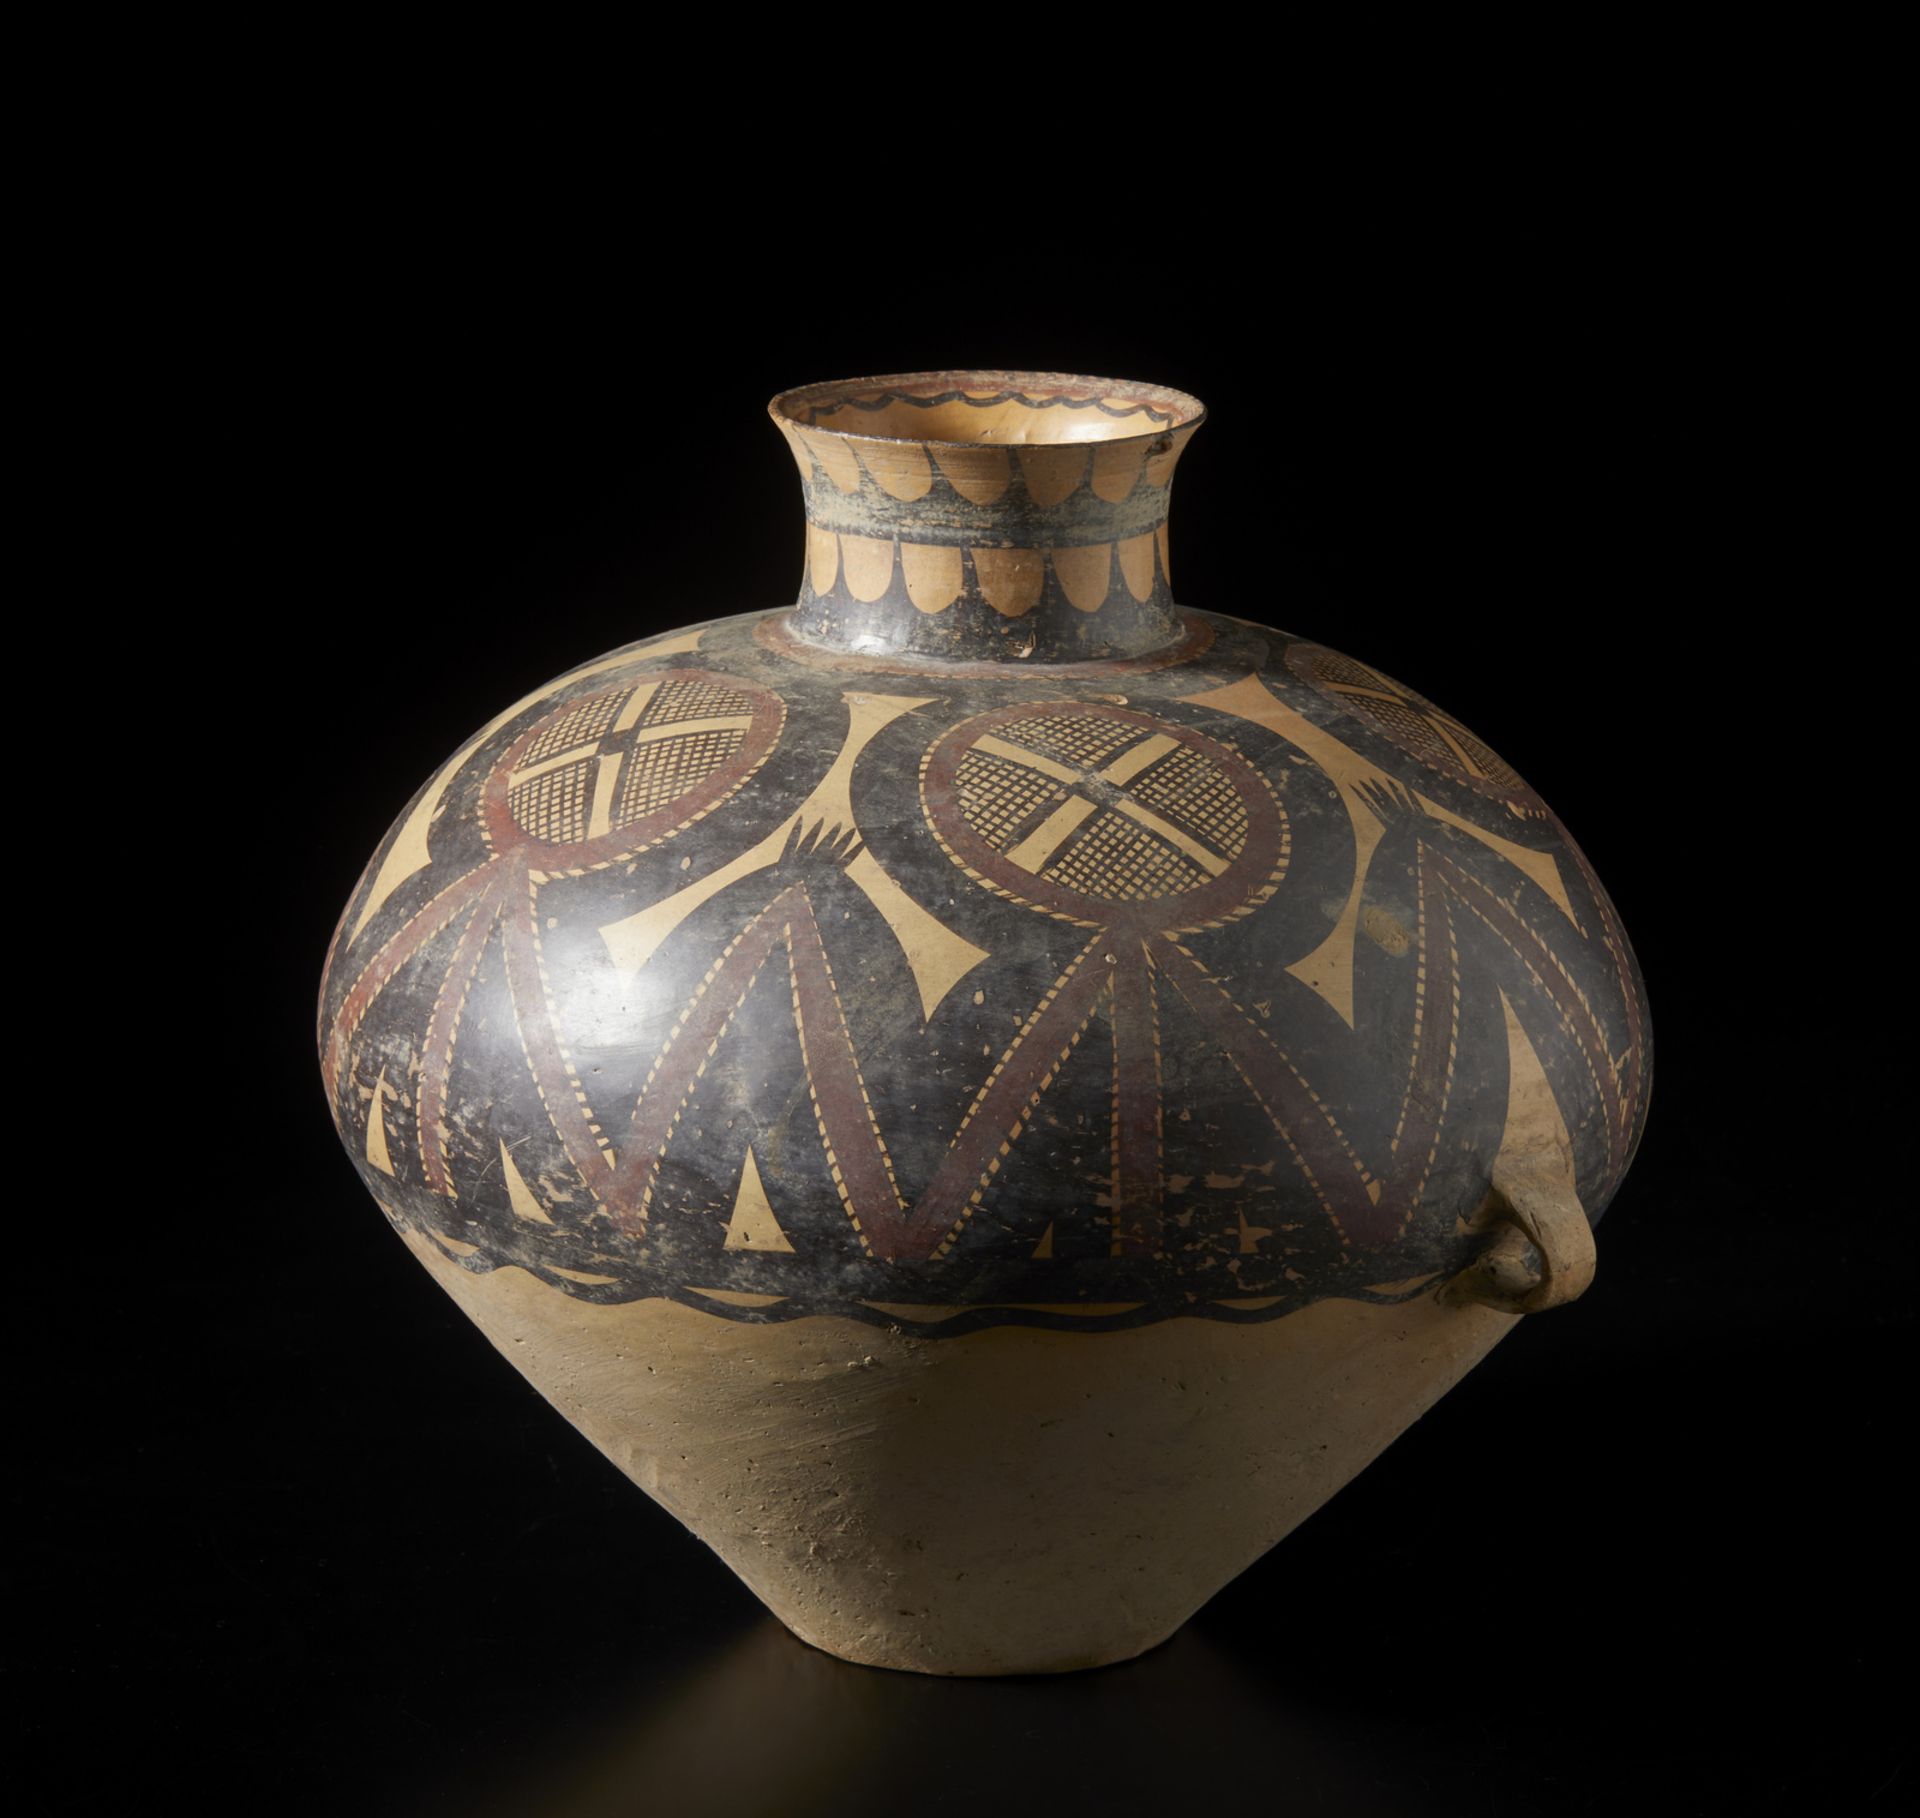 A terracotta jar with abstract and geometric decoration China, Neolithic period Cm 38,00 x 34,00 - Image 3 of 5